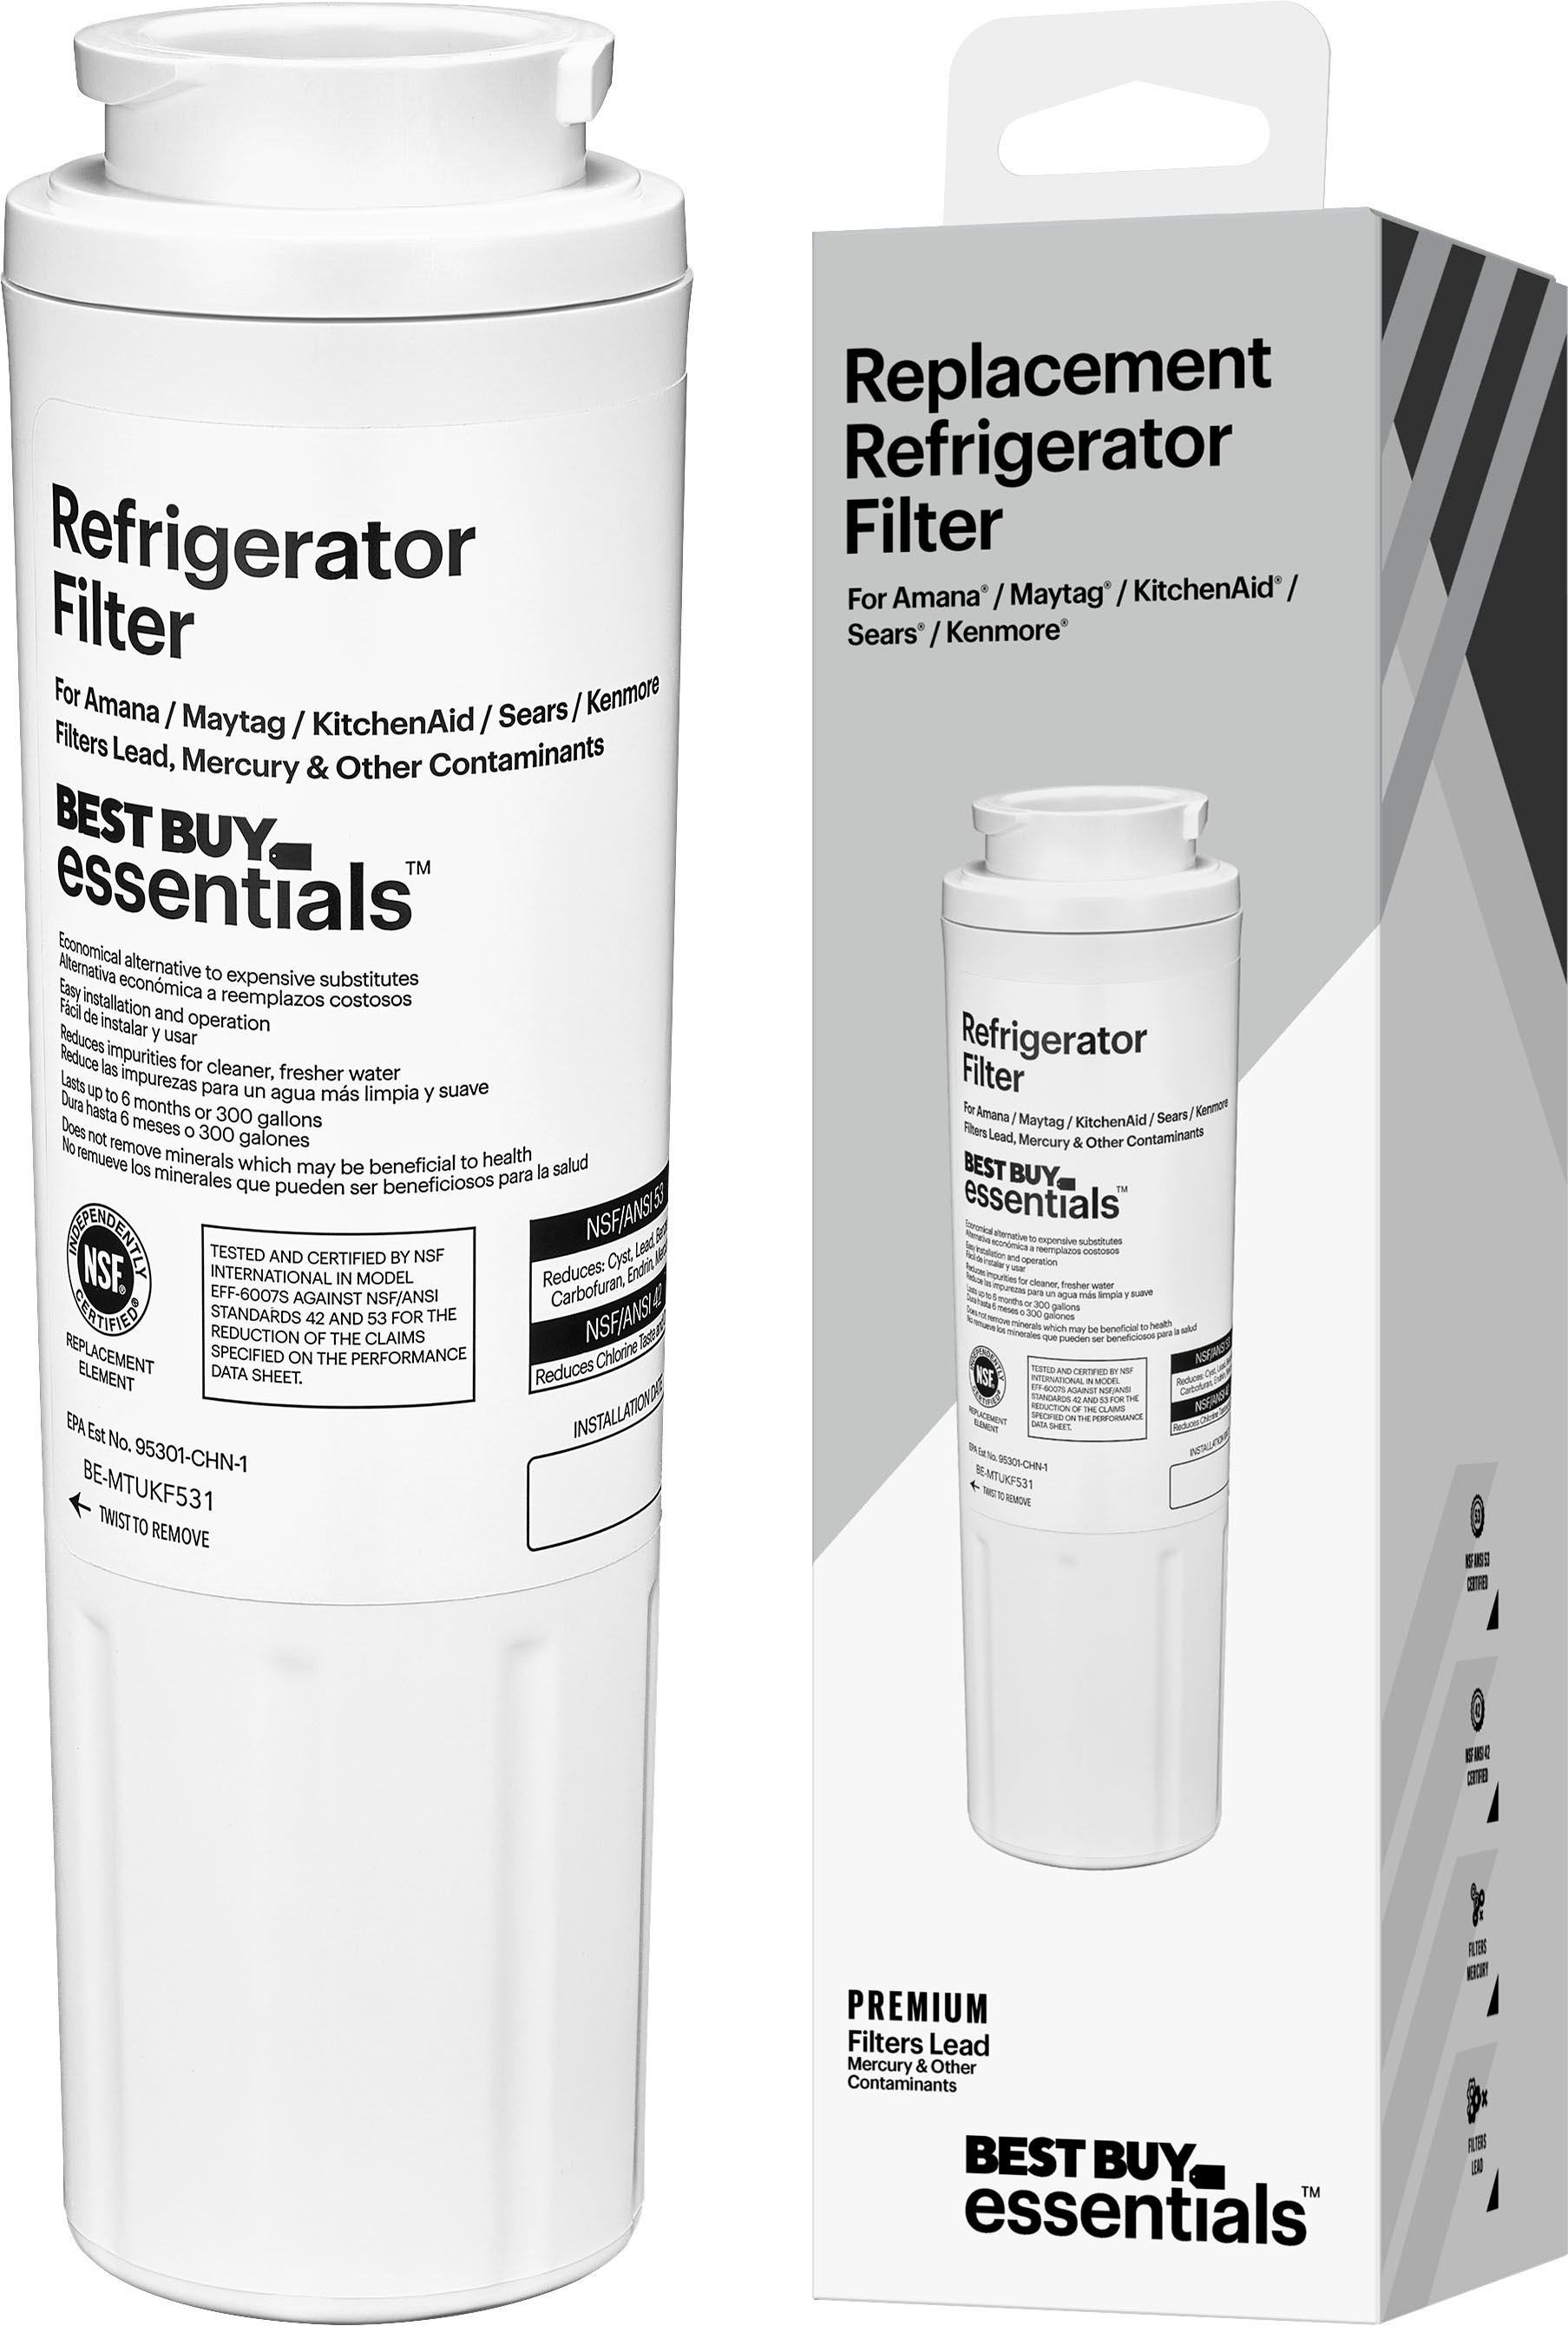 Best Buy Essentials - NSF 42/53 Water Filter Replacement for Select Amana/Maytag, KitchenAid and Sears/Kenmore Refrigerators - White